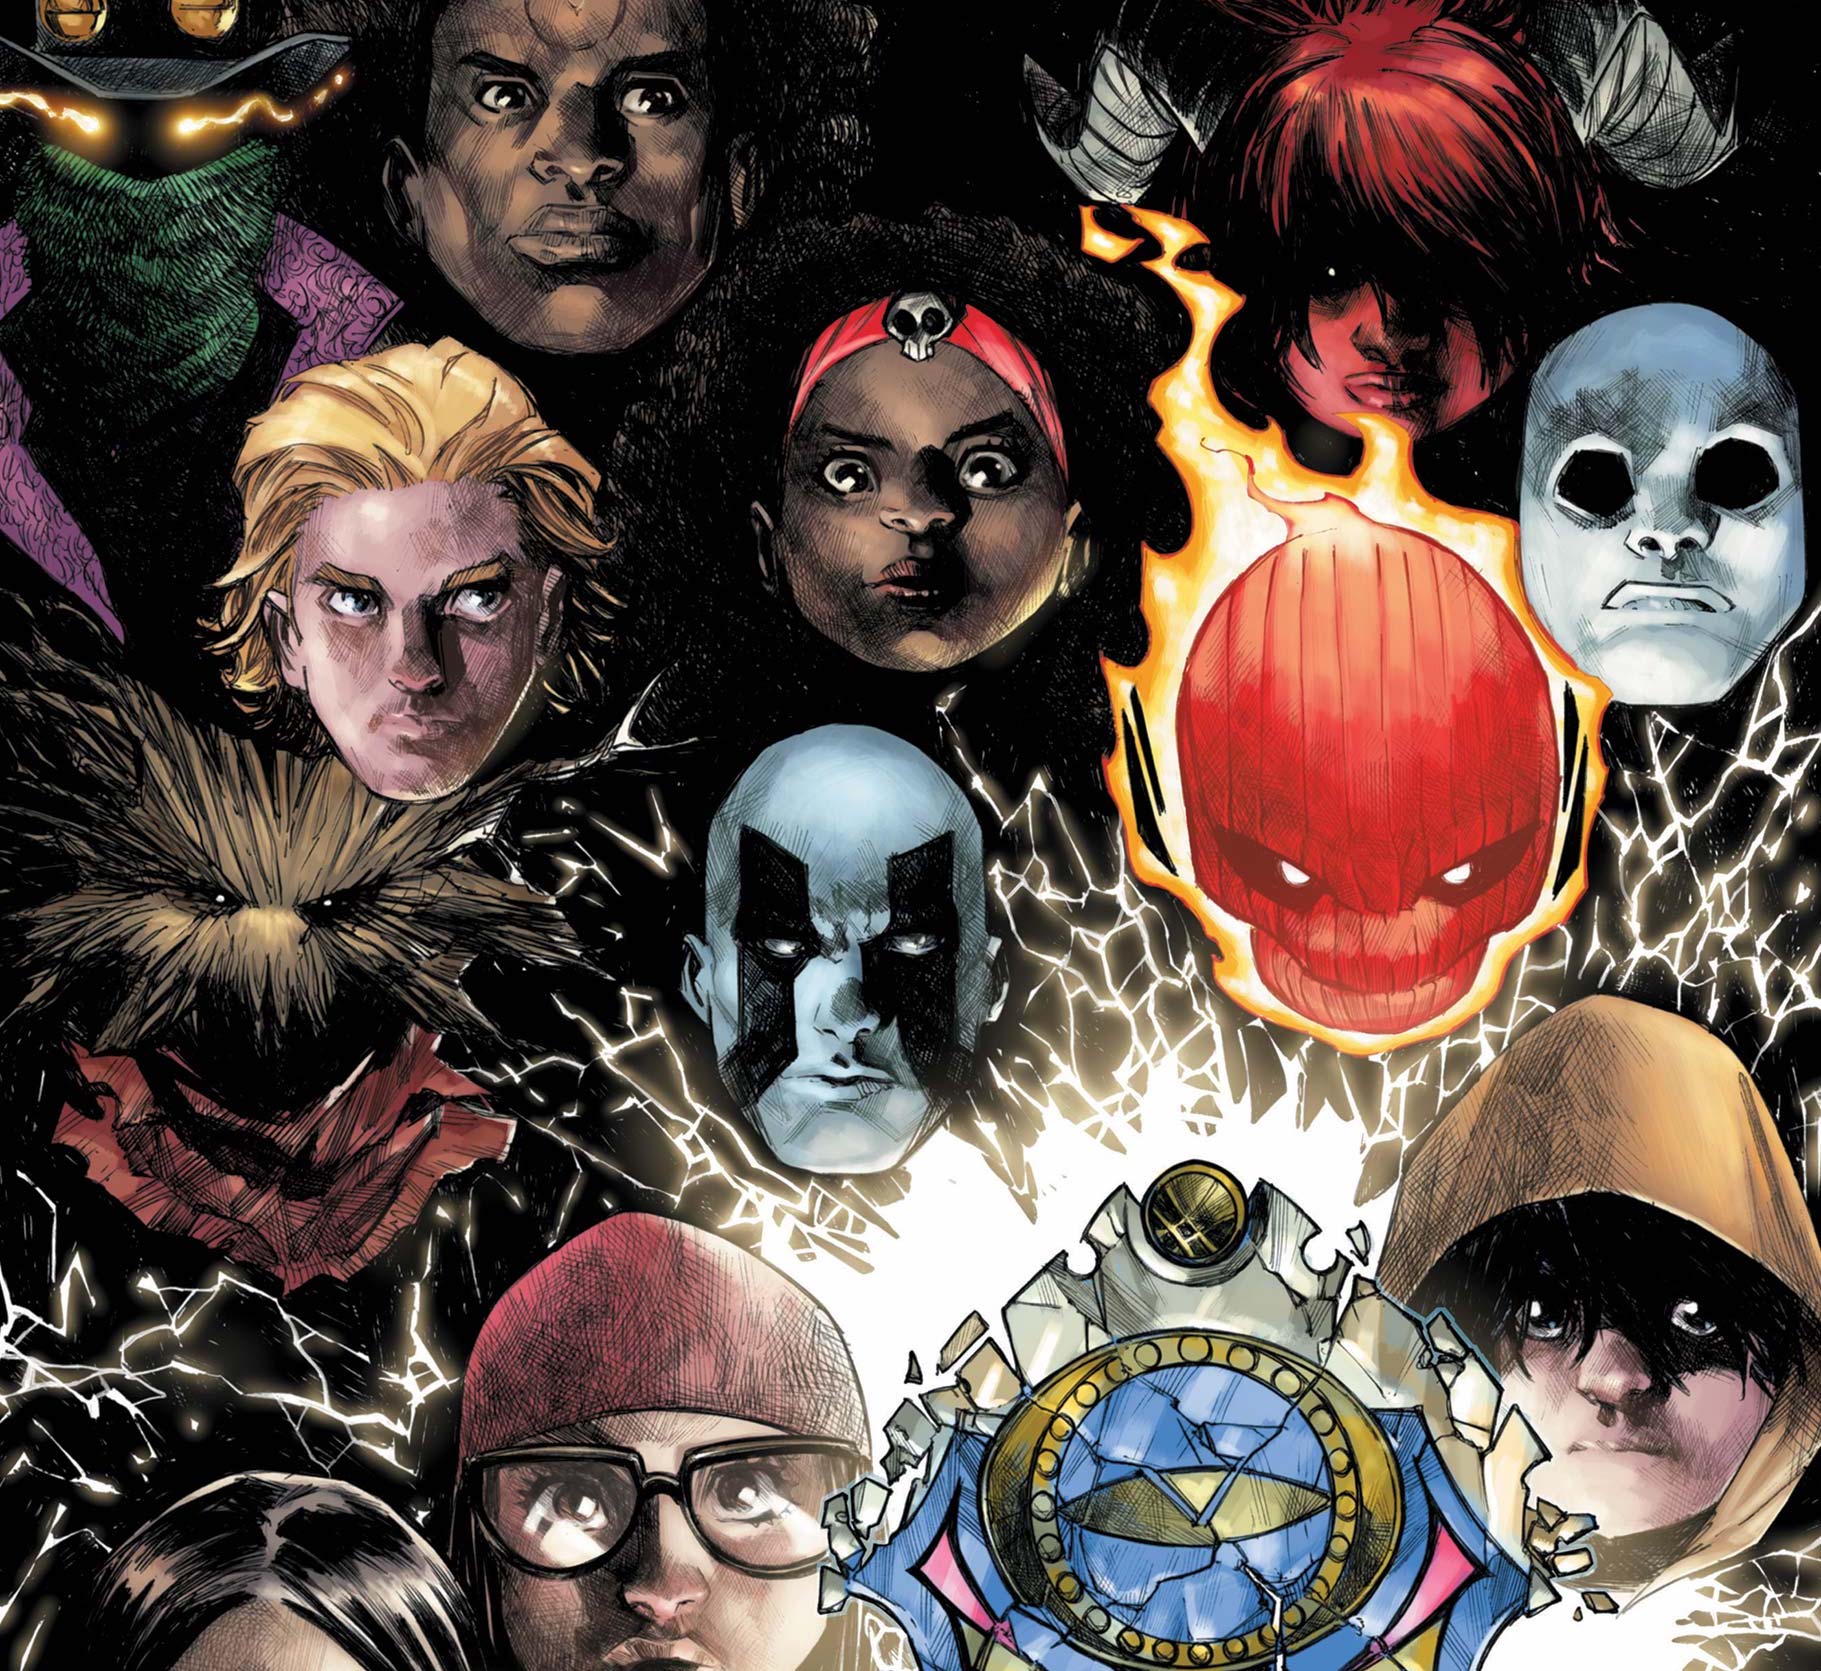 'Strange Academy' #18 is the final issue, but promises more of these students